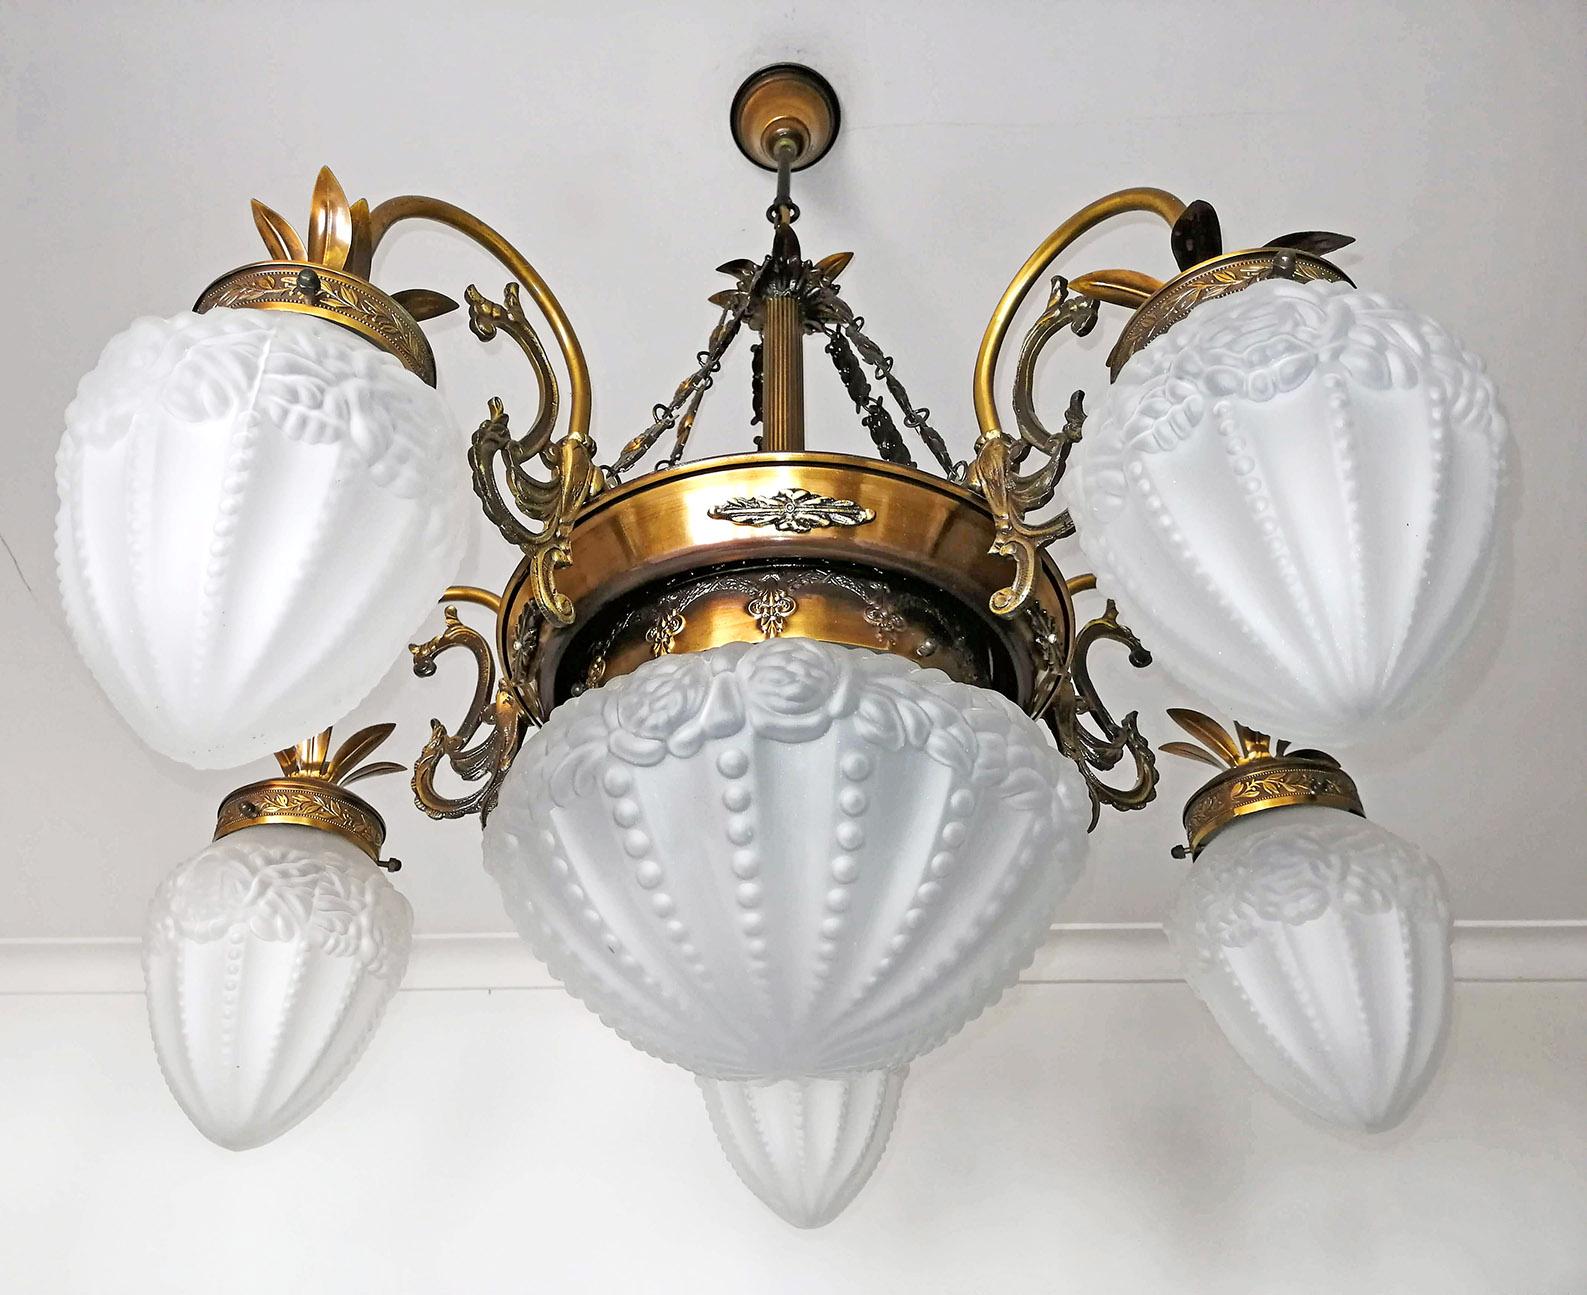 French Degué style Art Deco white frosted glass, six-light brass chandelier/ gold and bronze color with patina.
Six bulbs (five bulbs E14 40W + one bulb E27 60W)
Good working condition 
Measures: Diameter 28.5 in / 72 cm
Height 32 in / 80 cm
Glass